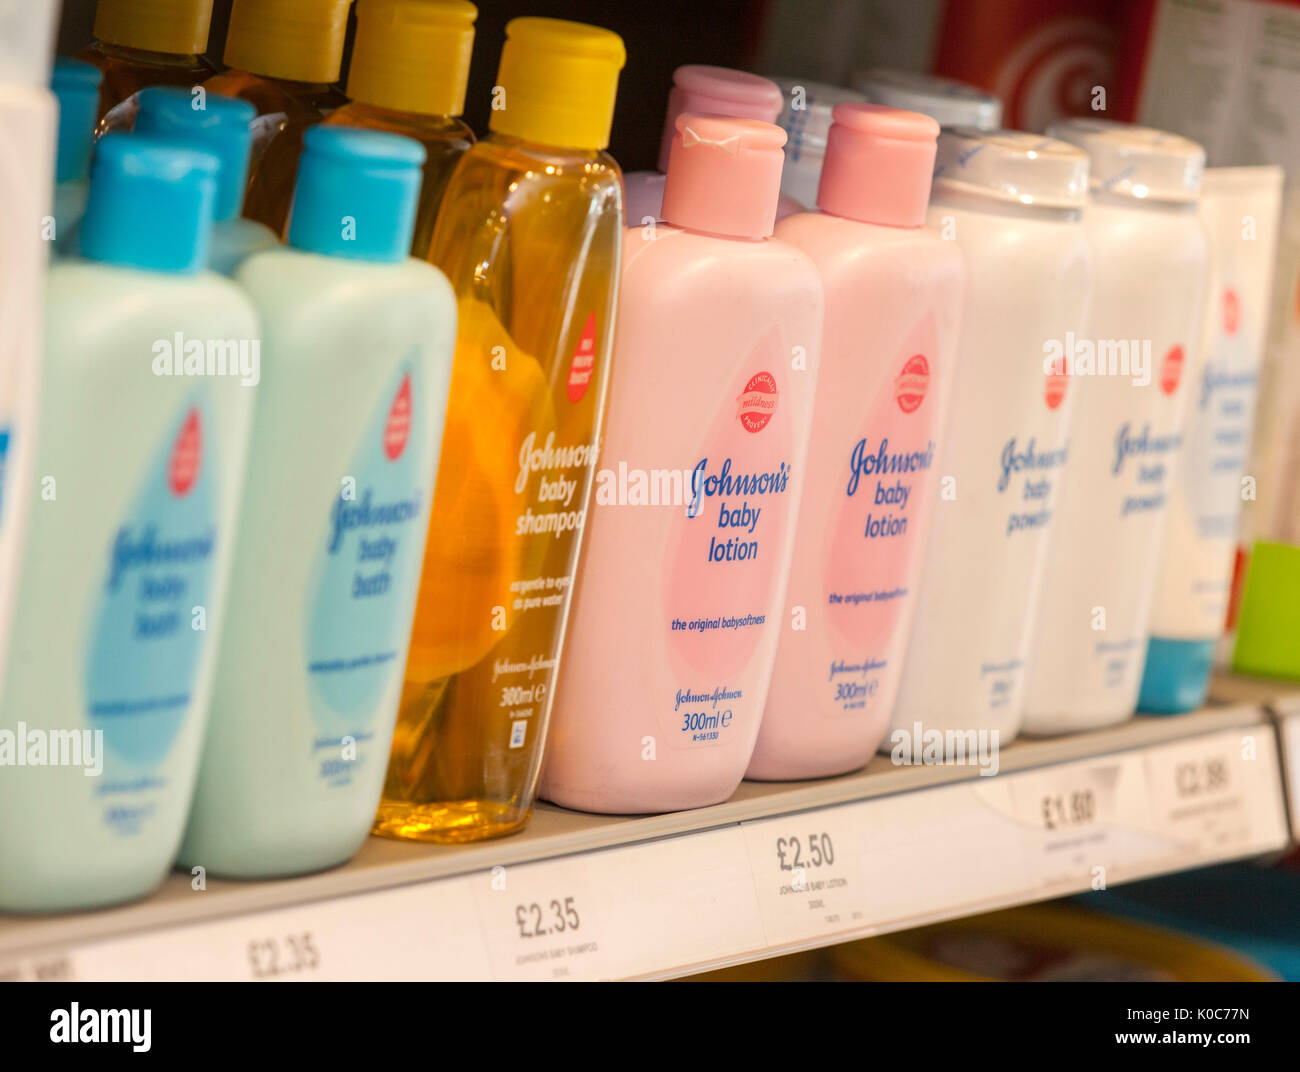 Johnsons baby products on sale in a pharmacy, talcum powder,baby powder,baby bath,baby lotion. Chemist shop. Stock Photo